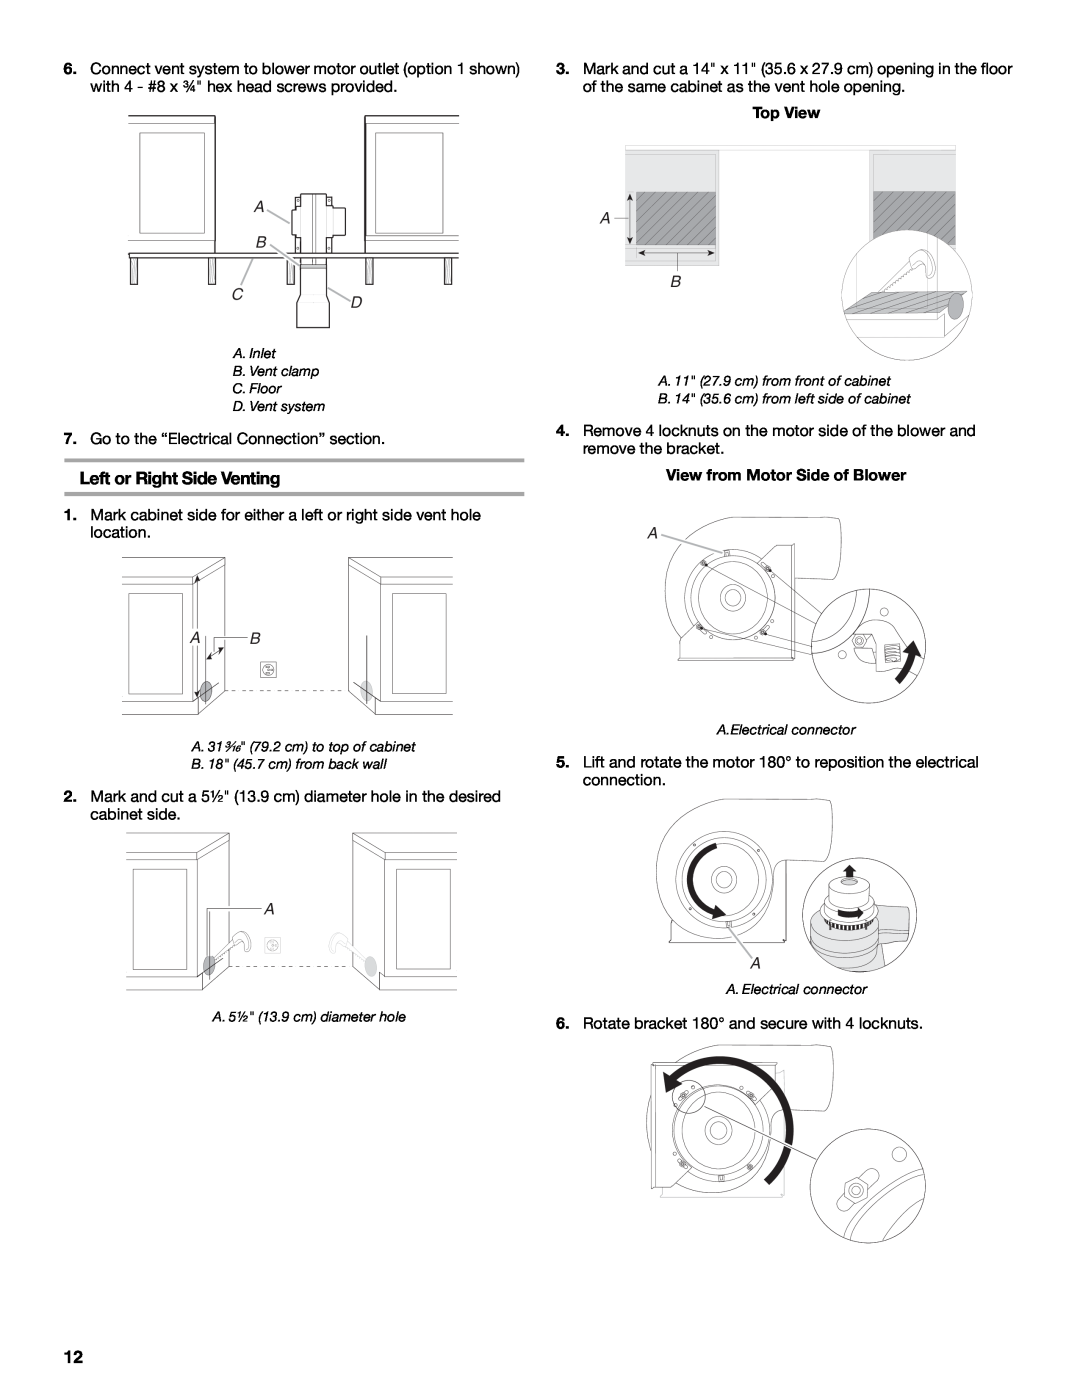 Jenn-Air W10253462A installation instructions A B Cd, Left or Right Side Venting 